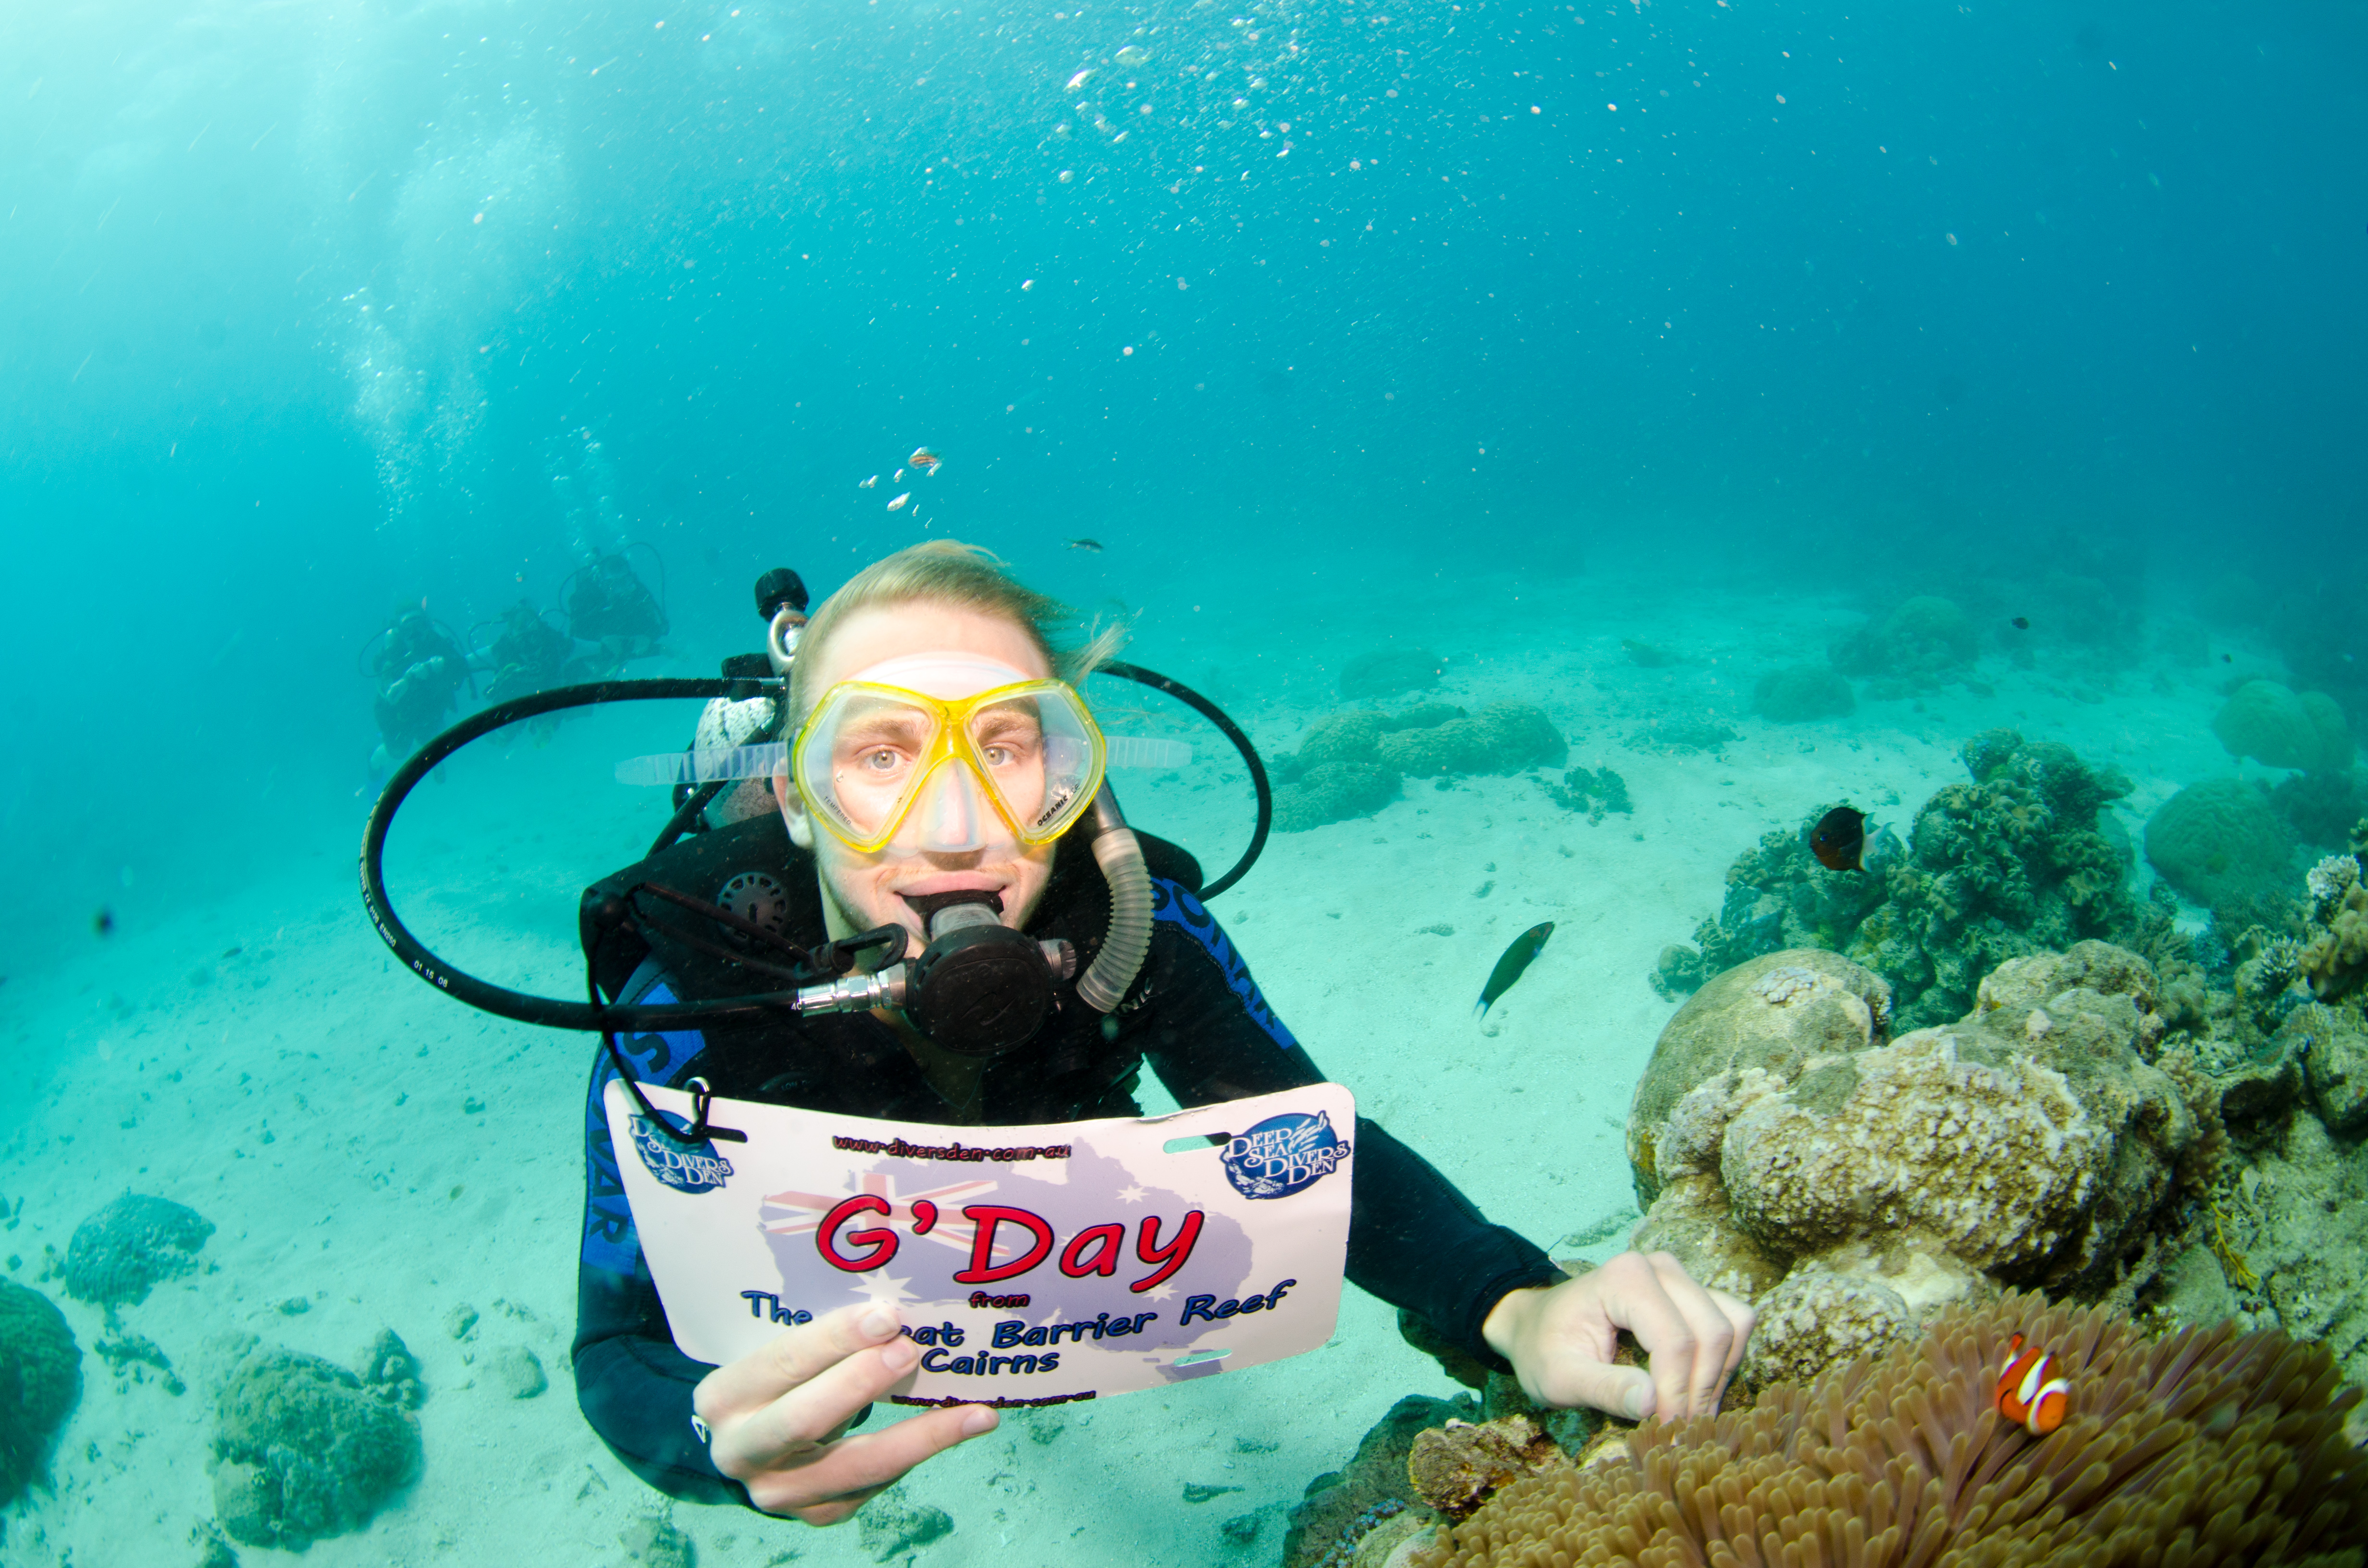 First Prize (selected by votes at UR International display): This was my first opportunity to swim with Nemo a.k.a. the clownfish. This was taken off the coast of Cairns at the Great Barrier Reef a couple weeks after I had finished up my semester in Sydney. Even through the mask you can still see me smiling! Photo submitted by Bryan Wilson who studied abroad in Sydney, Australia